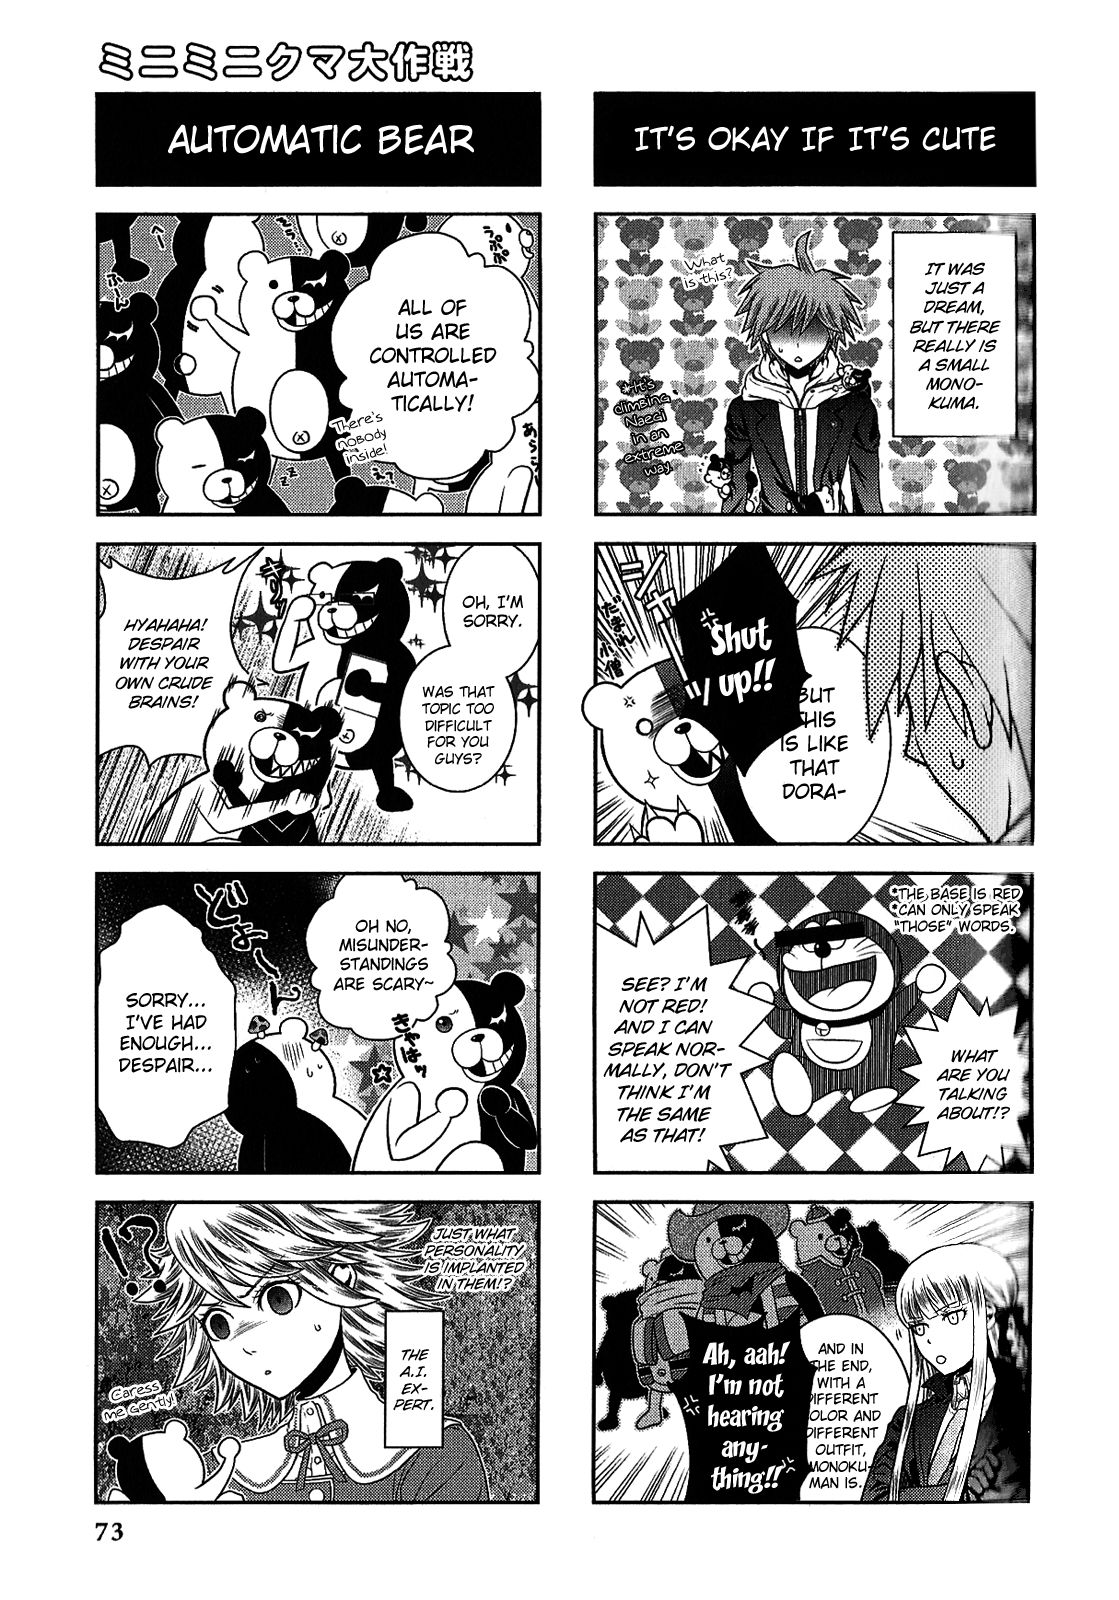 Danganronpa - The Academy of Hope and the High School Students of Despair 4-koma Kings - chapter 12 - #2